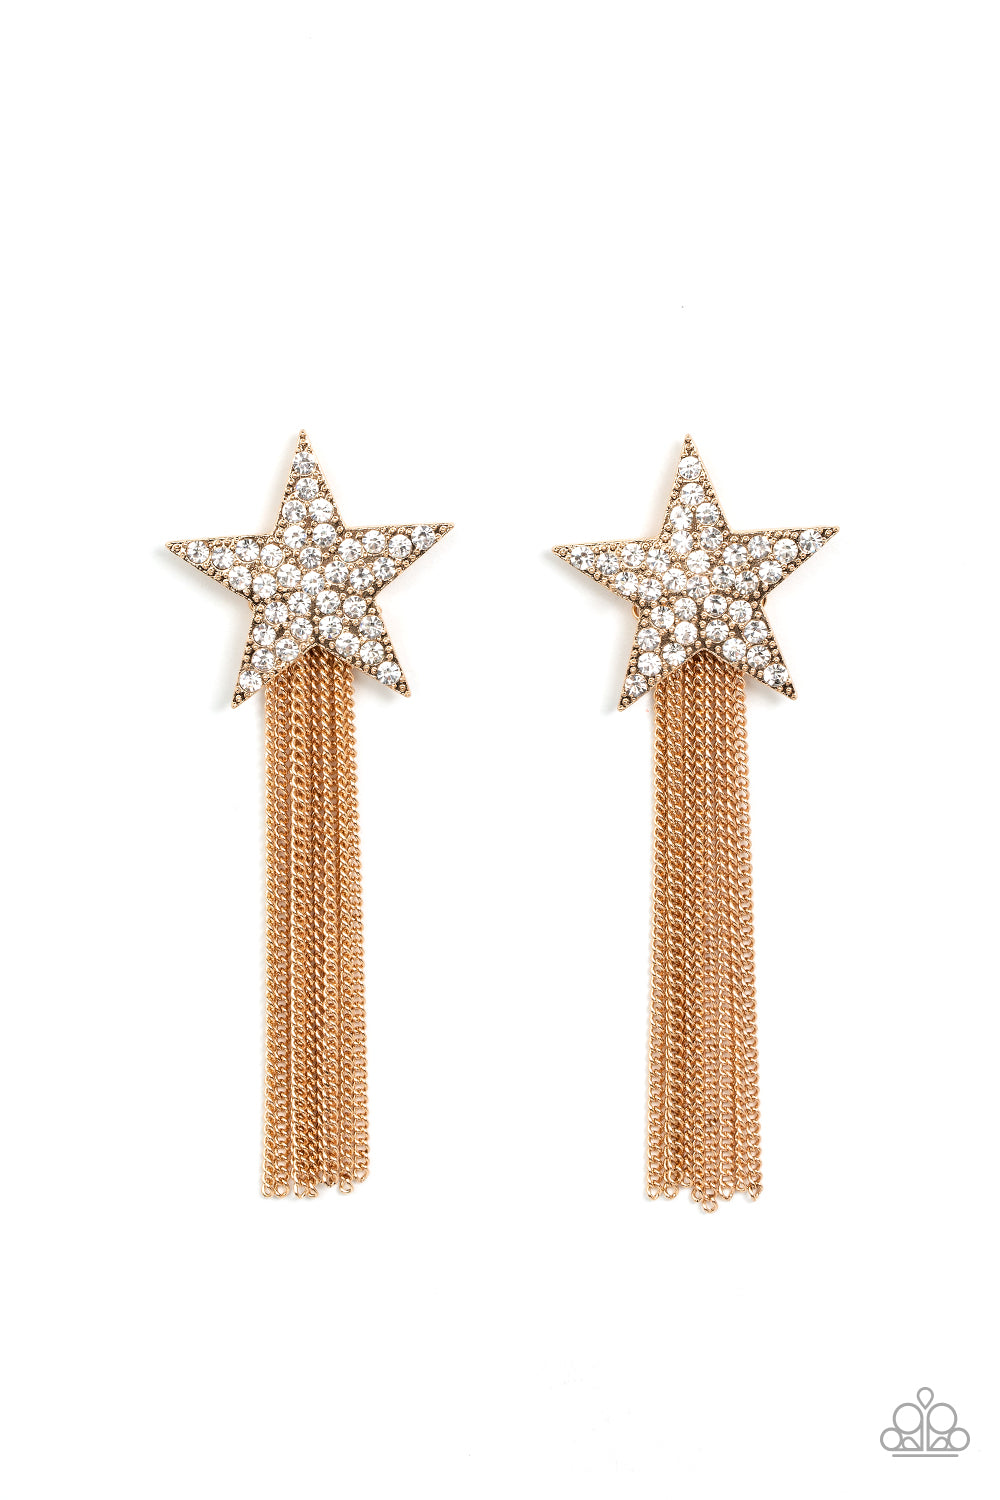 Paparazzi Accessories Superstar Solo - Gold A curtain of gold chains streams out from the bottom of an oversized gold star encrusted in blinding white rhinestones, resulting in a stellar tassel. Earring attaches to a standard post fitting. Sold as one pai